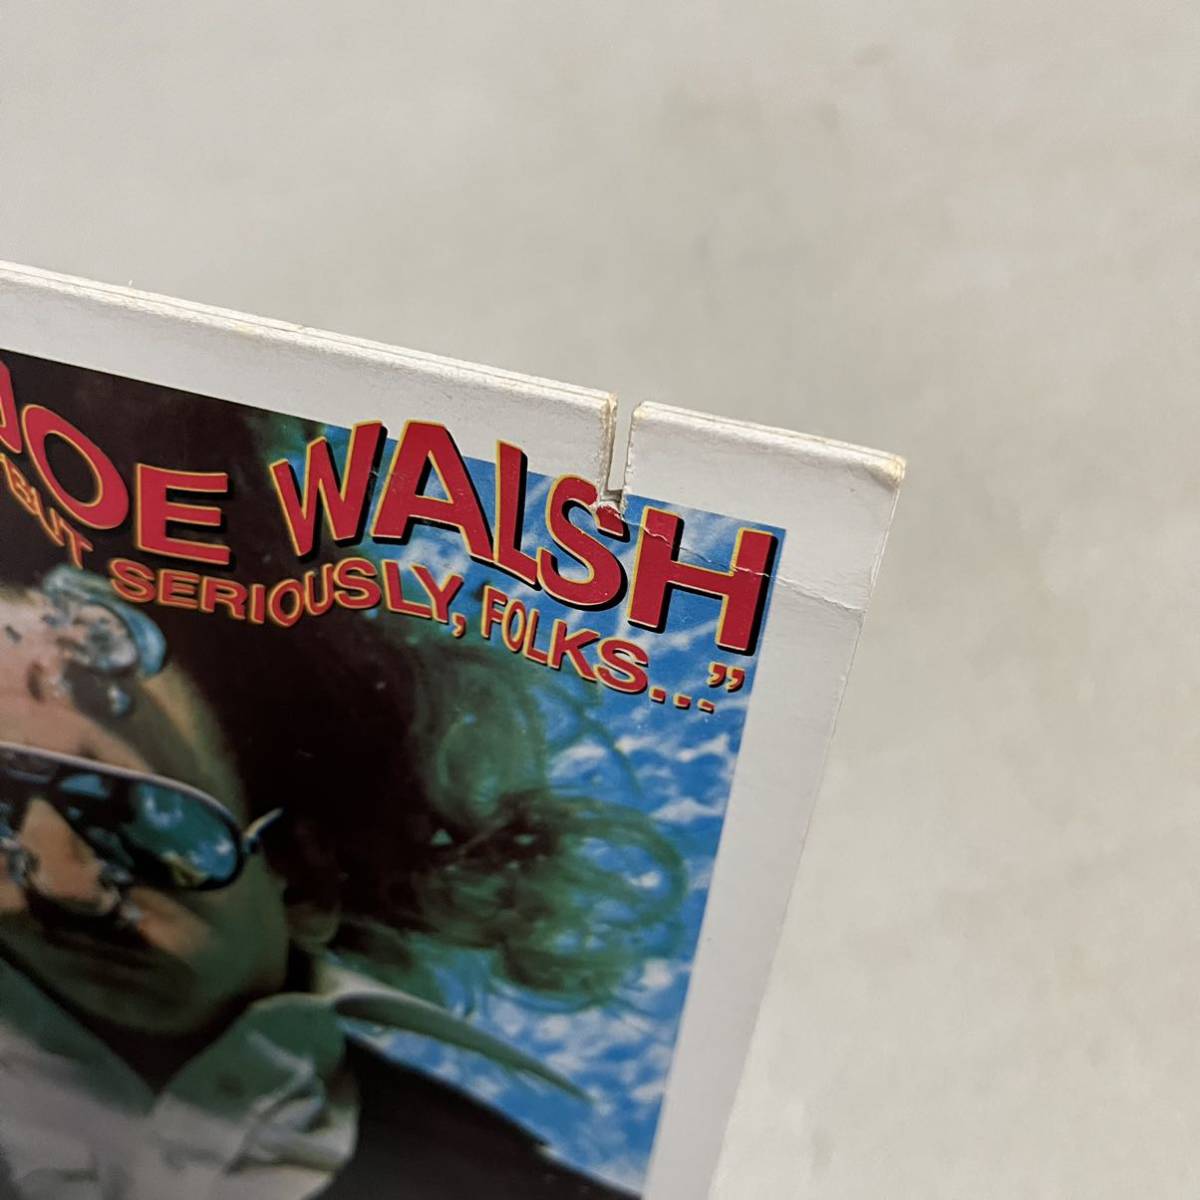 【US盤米盤】JOE WALSH BUT SERIOUSLY FOLKS ジョーウォルシュ OVER AND OVER / LP レコード / 6E-141 / 洋楽ロック /_画像4